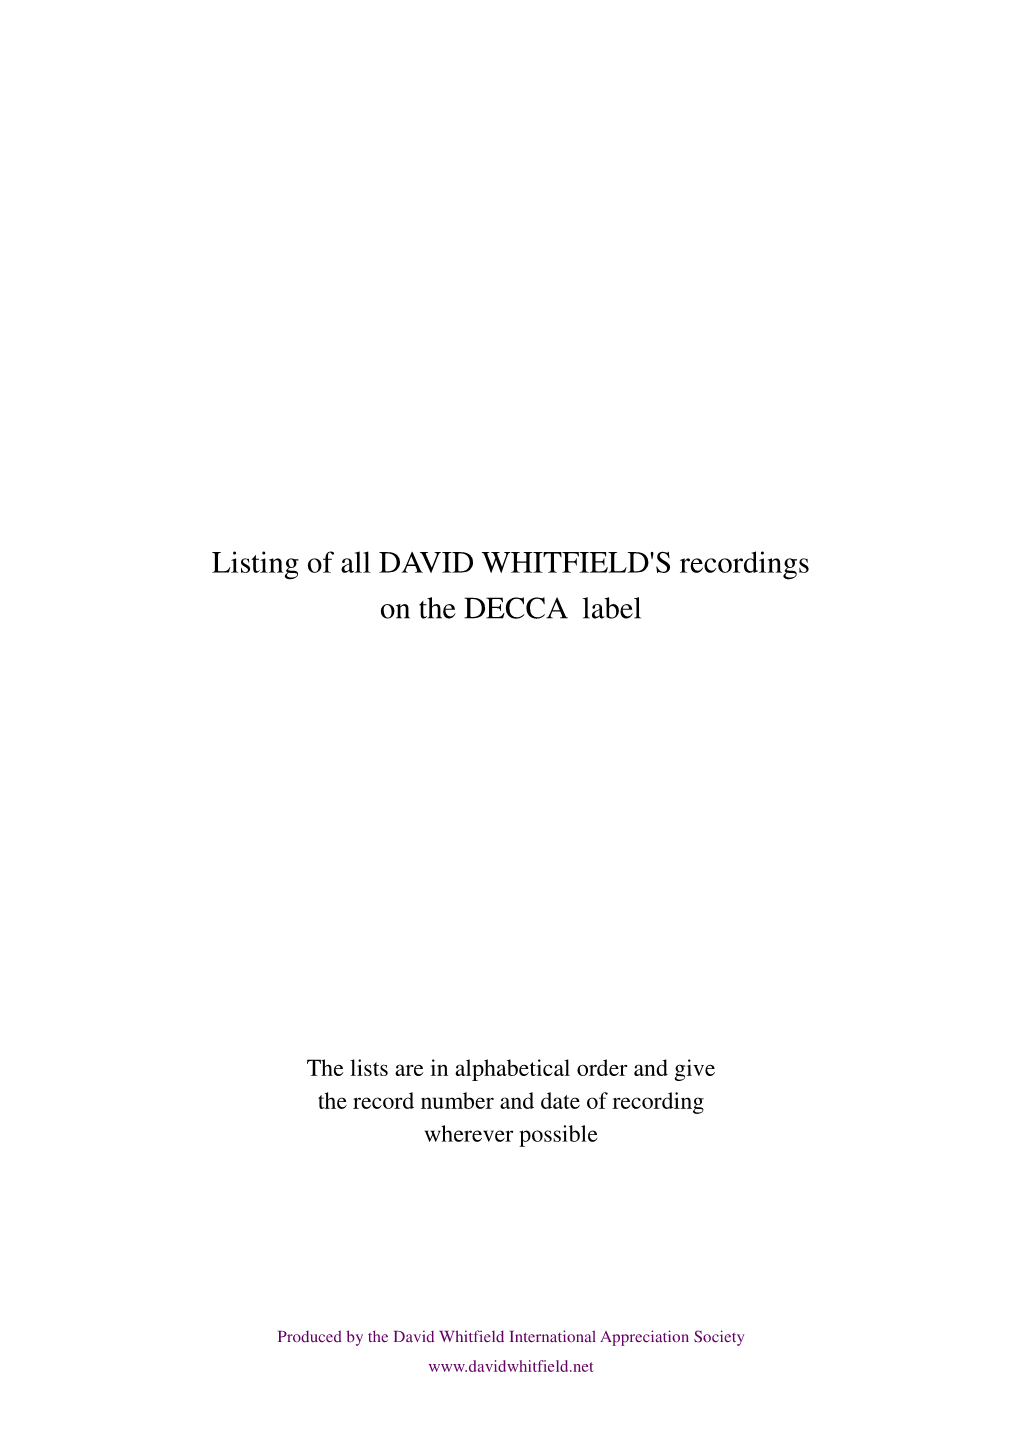 Listing of All DAVID WHITFIELD's Recordings on the DECCA Label